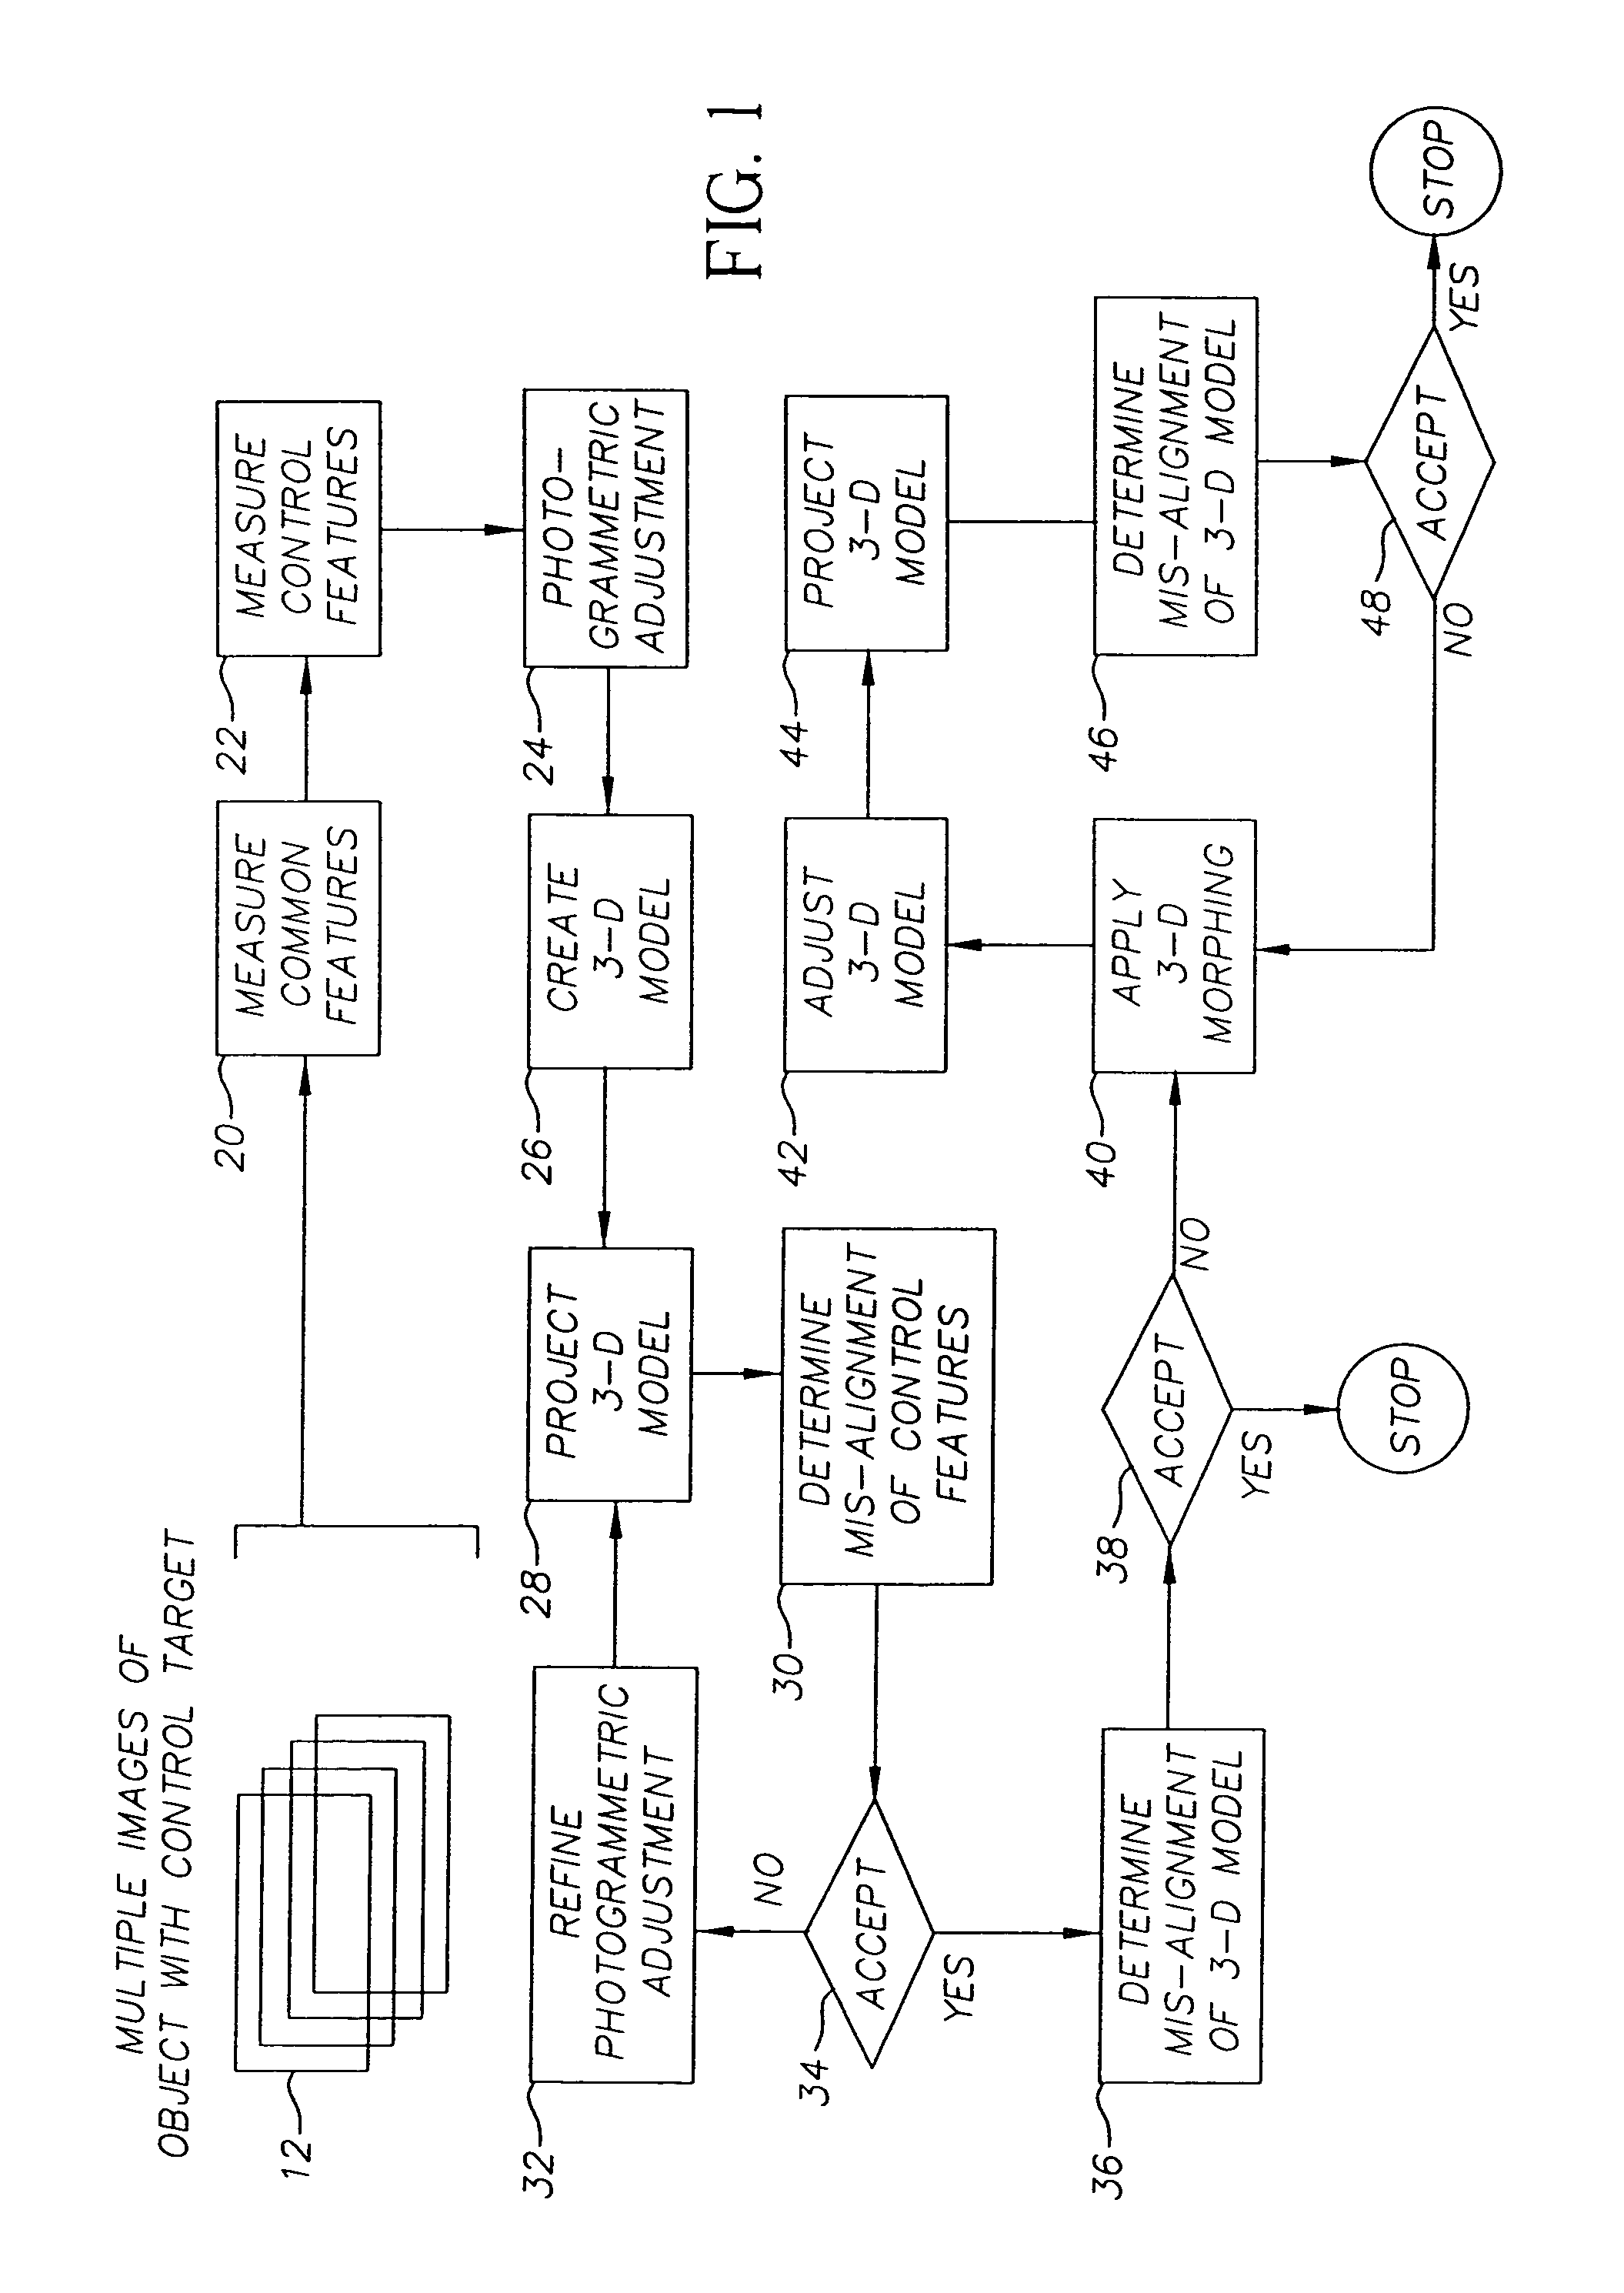 Method and system for creating dental models from imagery